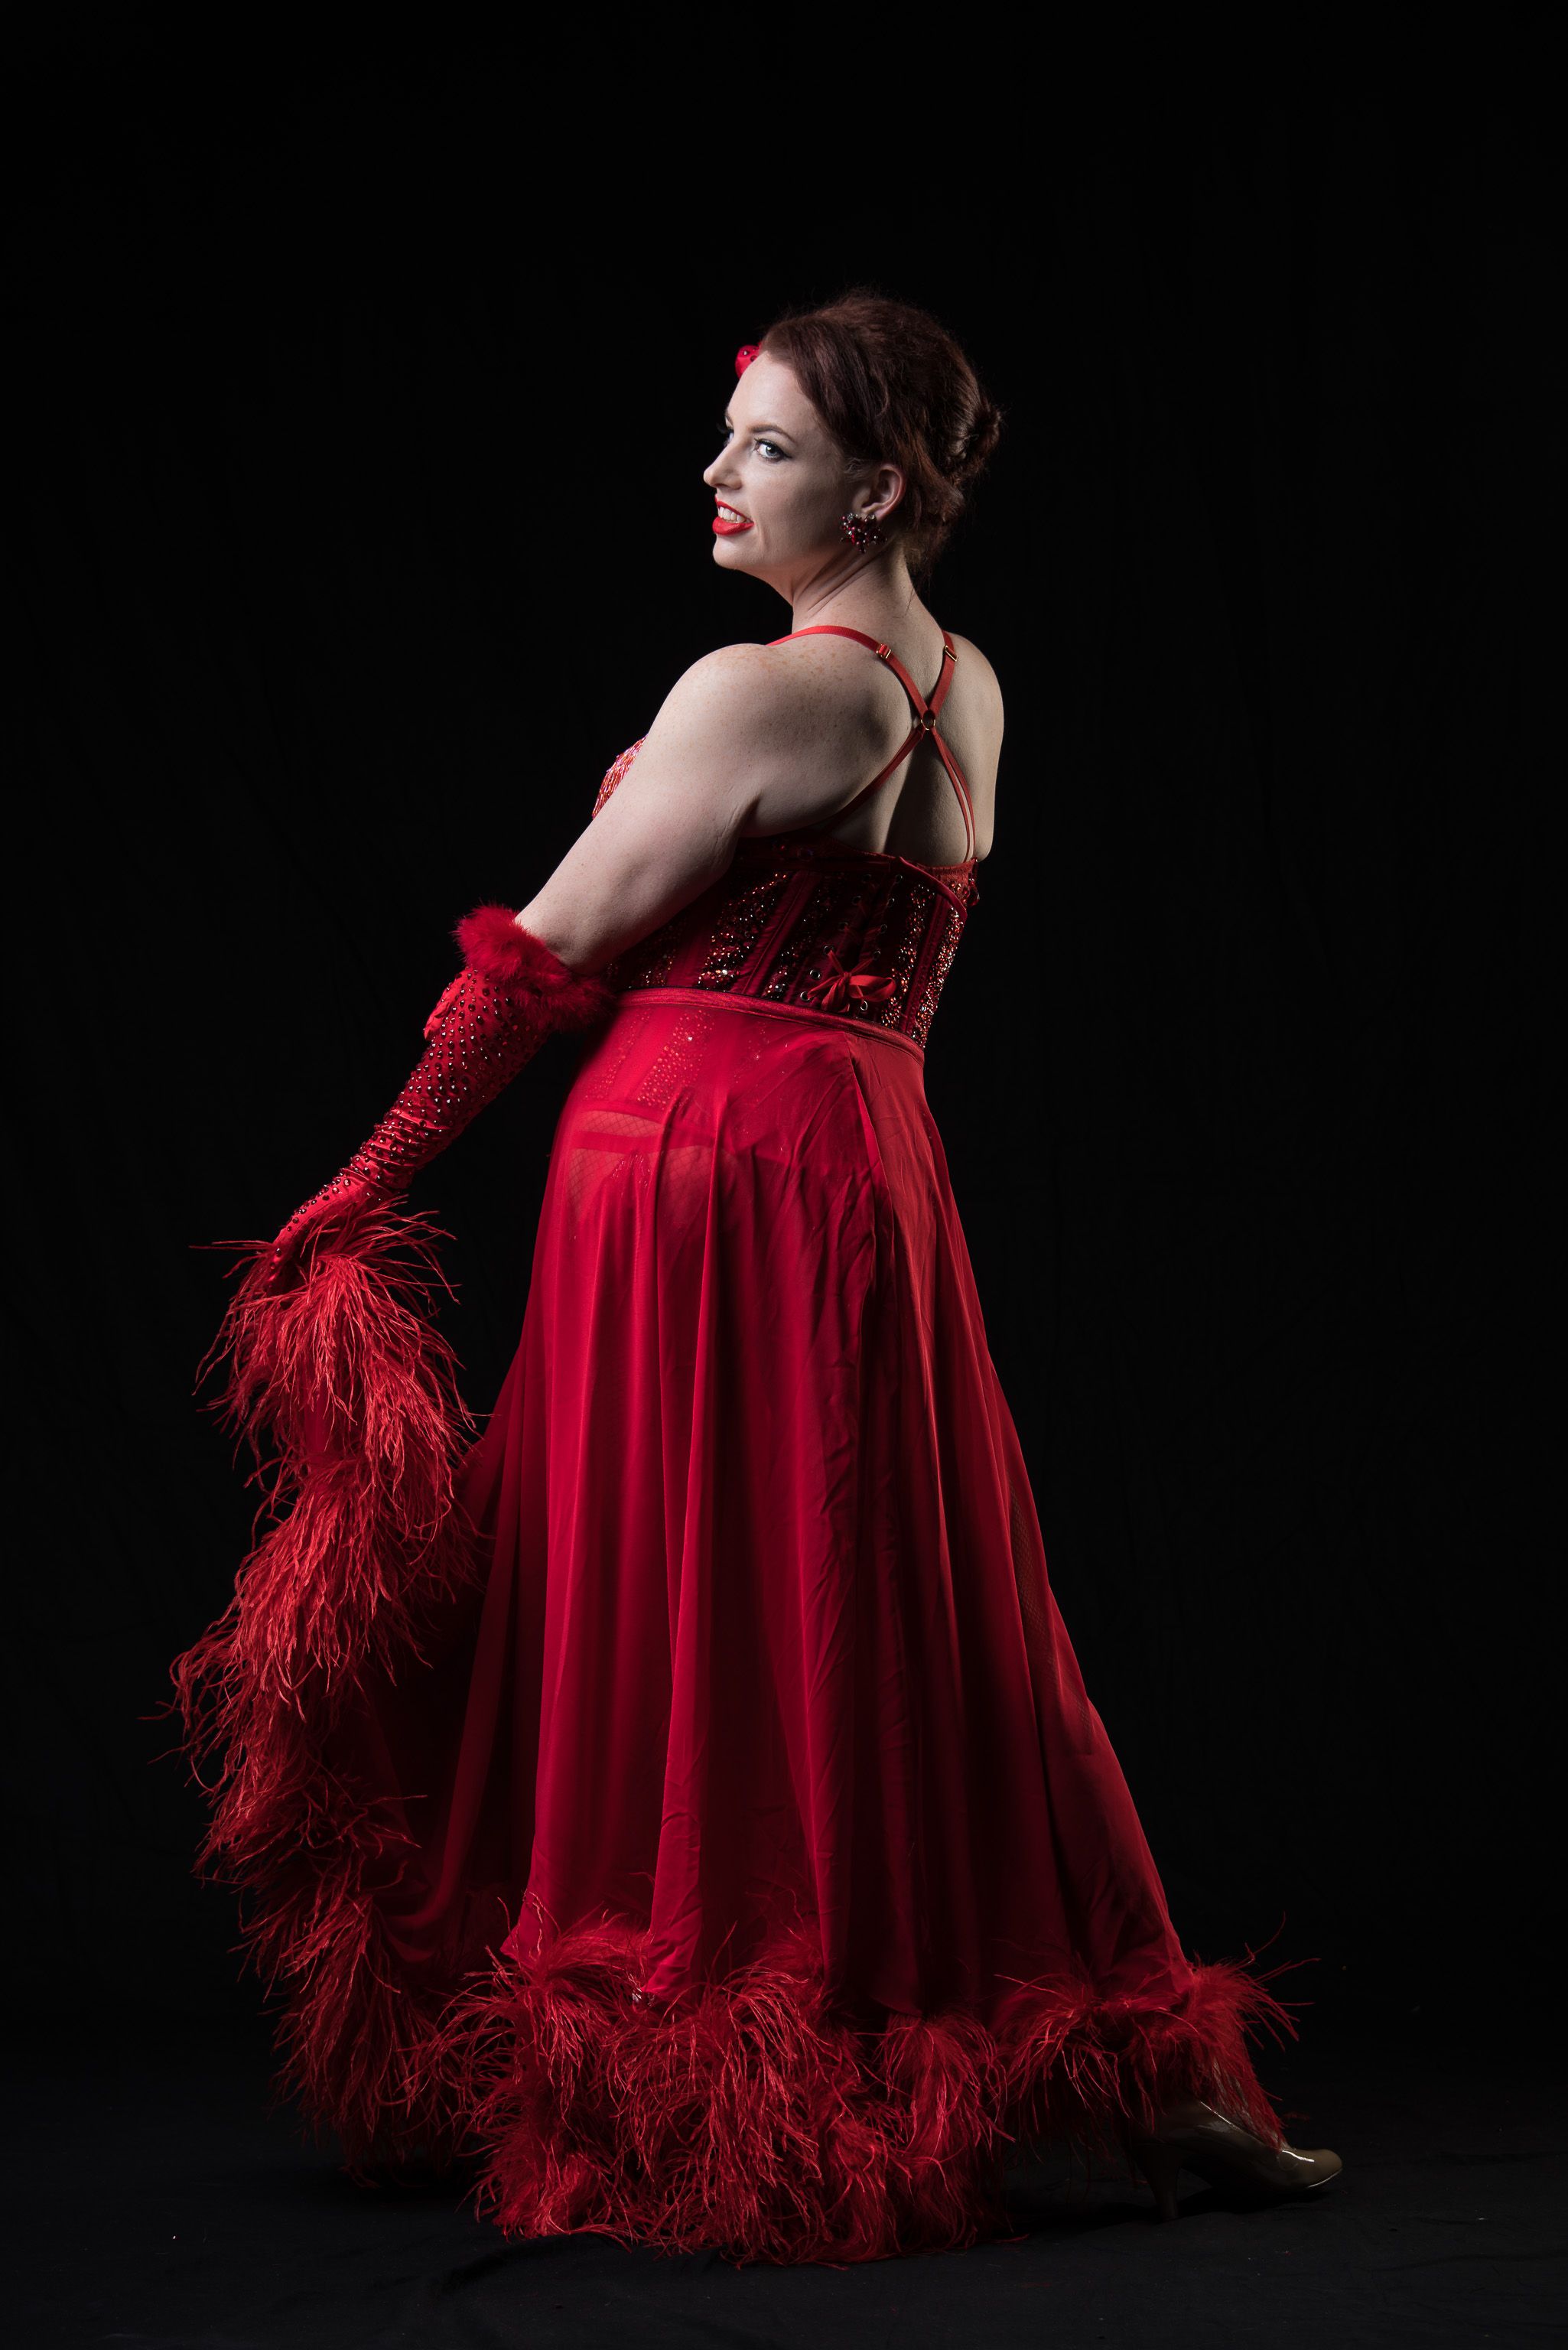 Burlesque performer Grace Cherry - Red Outfit